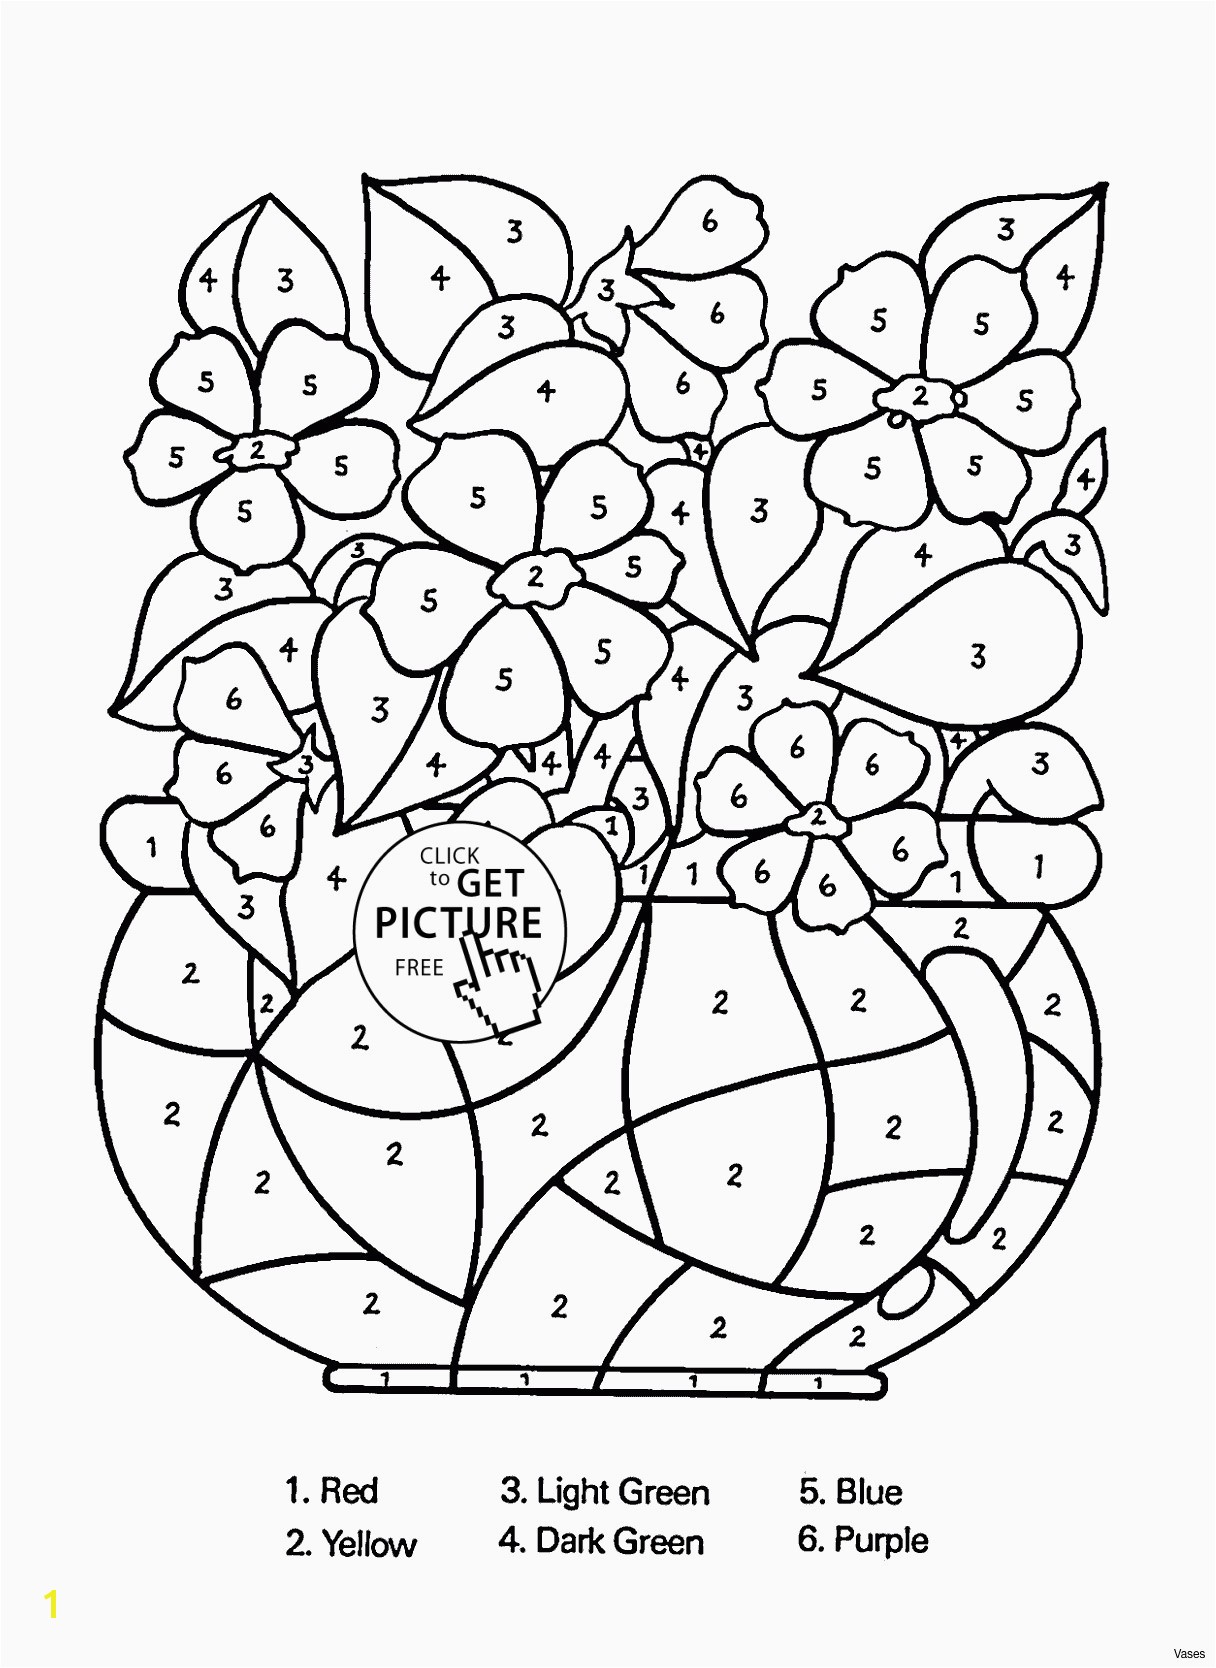 Coloring Pages Abc S Print 2018 Free Abc Coloring Pages to Print Katesgrove